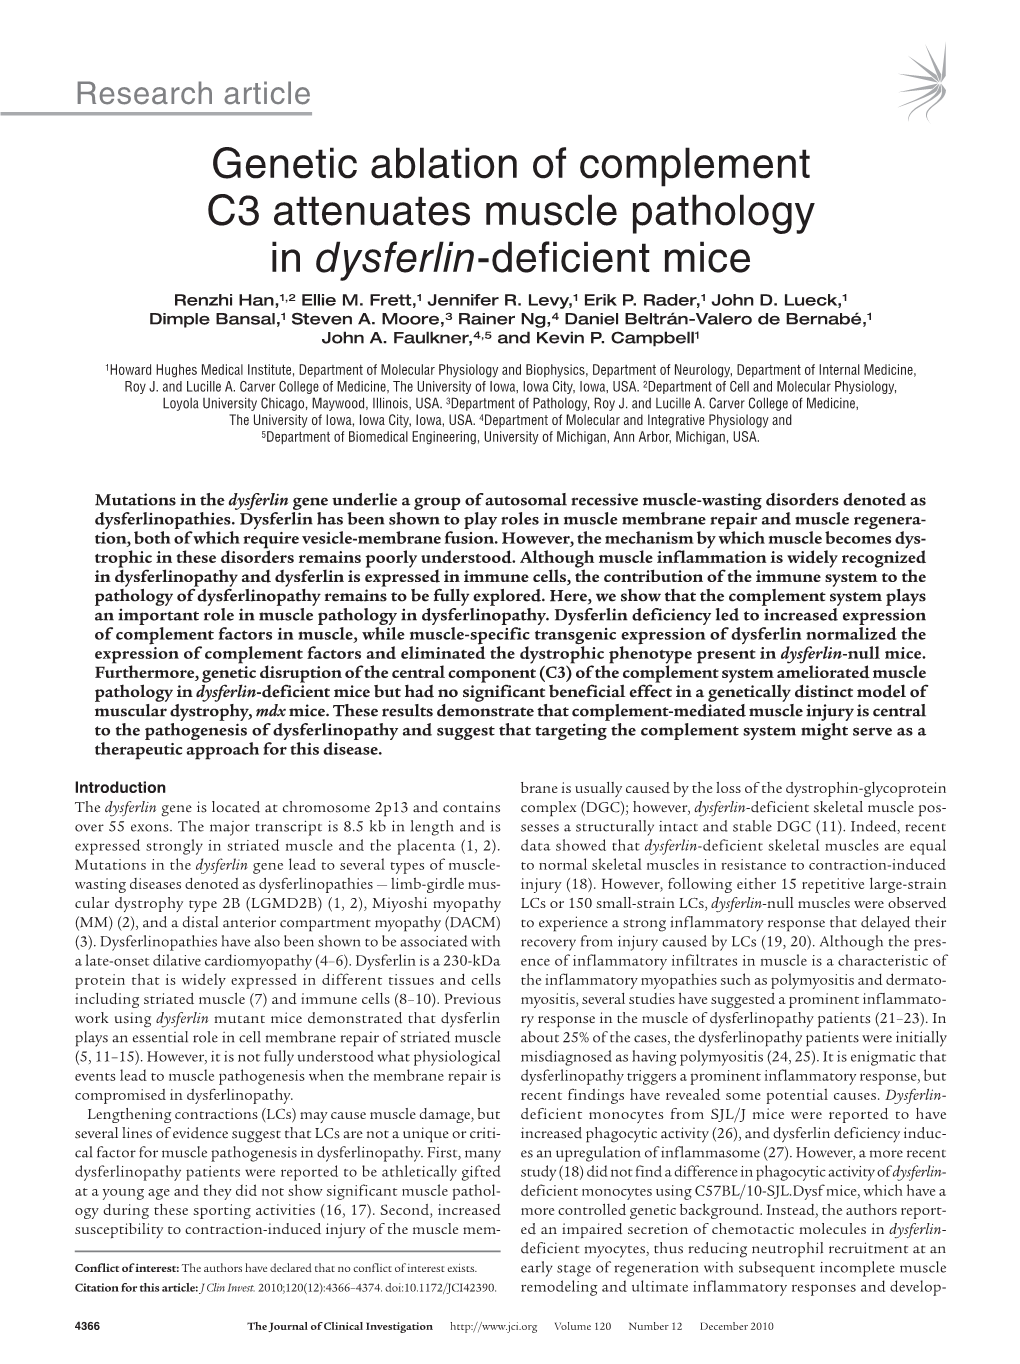 Genetic Ablation of Complement C3 Attenuates Muscle Pathology in Dysferlin-Deficient Mice Renzhi Han,1,2 Ellie M